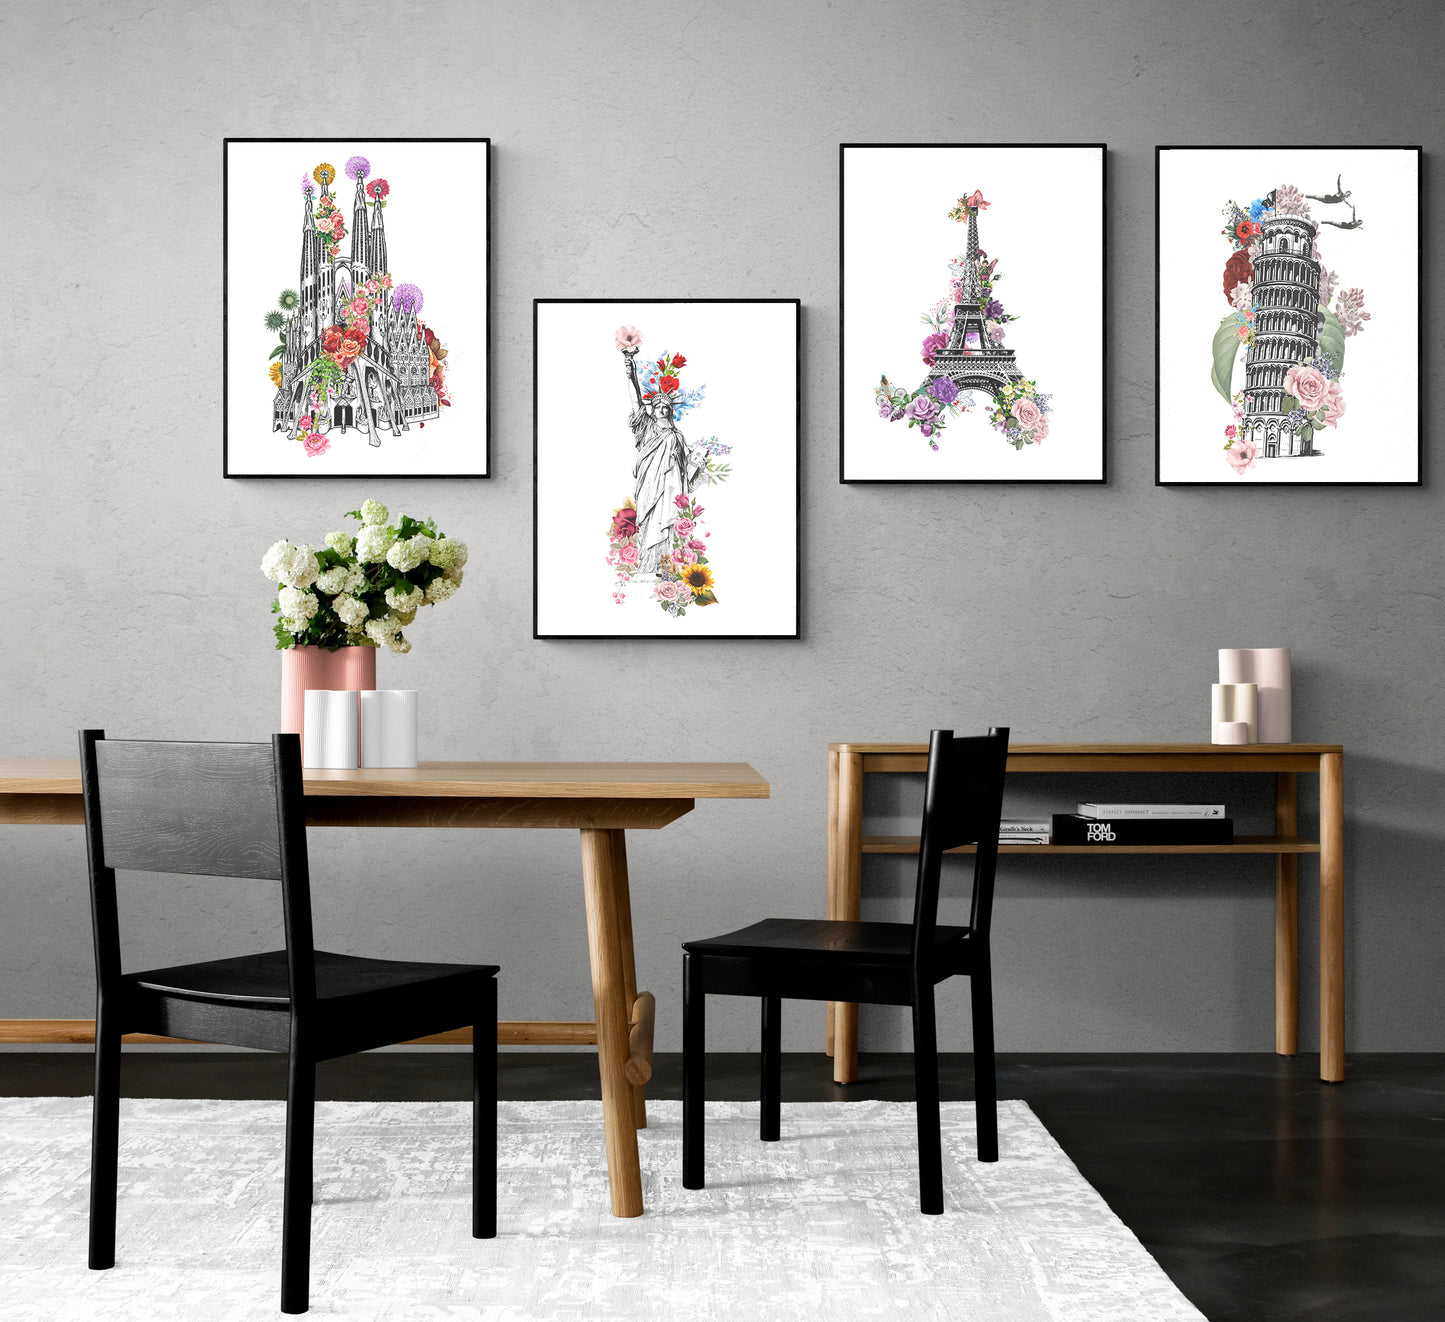 This Pyramids Egypt Flowers Poster is the perfect poster for art enthusiasts looking to learn human anatomy in art. It features illustrations of monuments associated with Egyptian culture and clear anatomical illustrations of human drawing anatomy. Perfect for adding an educational element to any wall, this poster is a must-have!